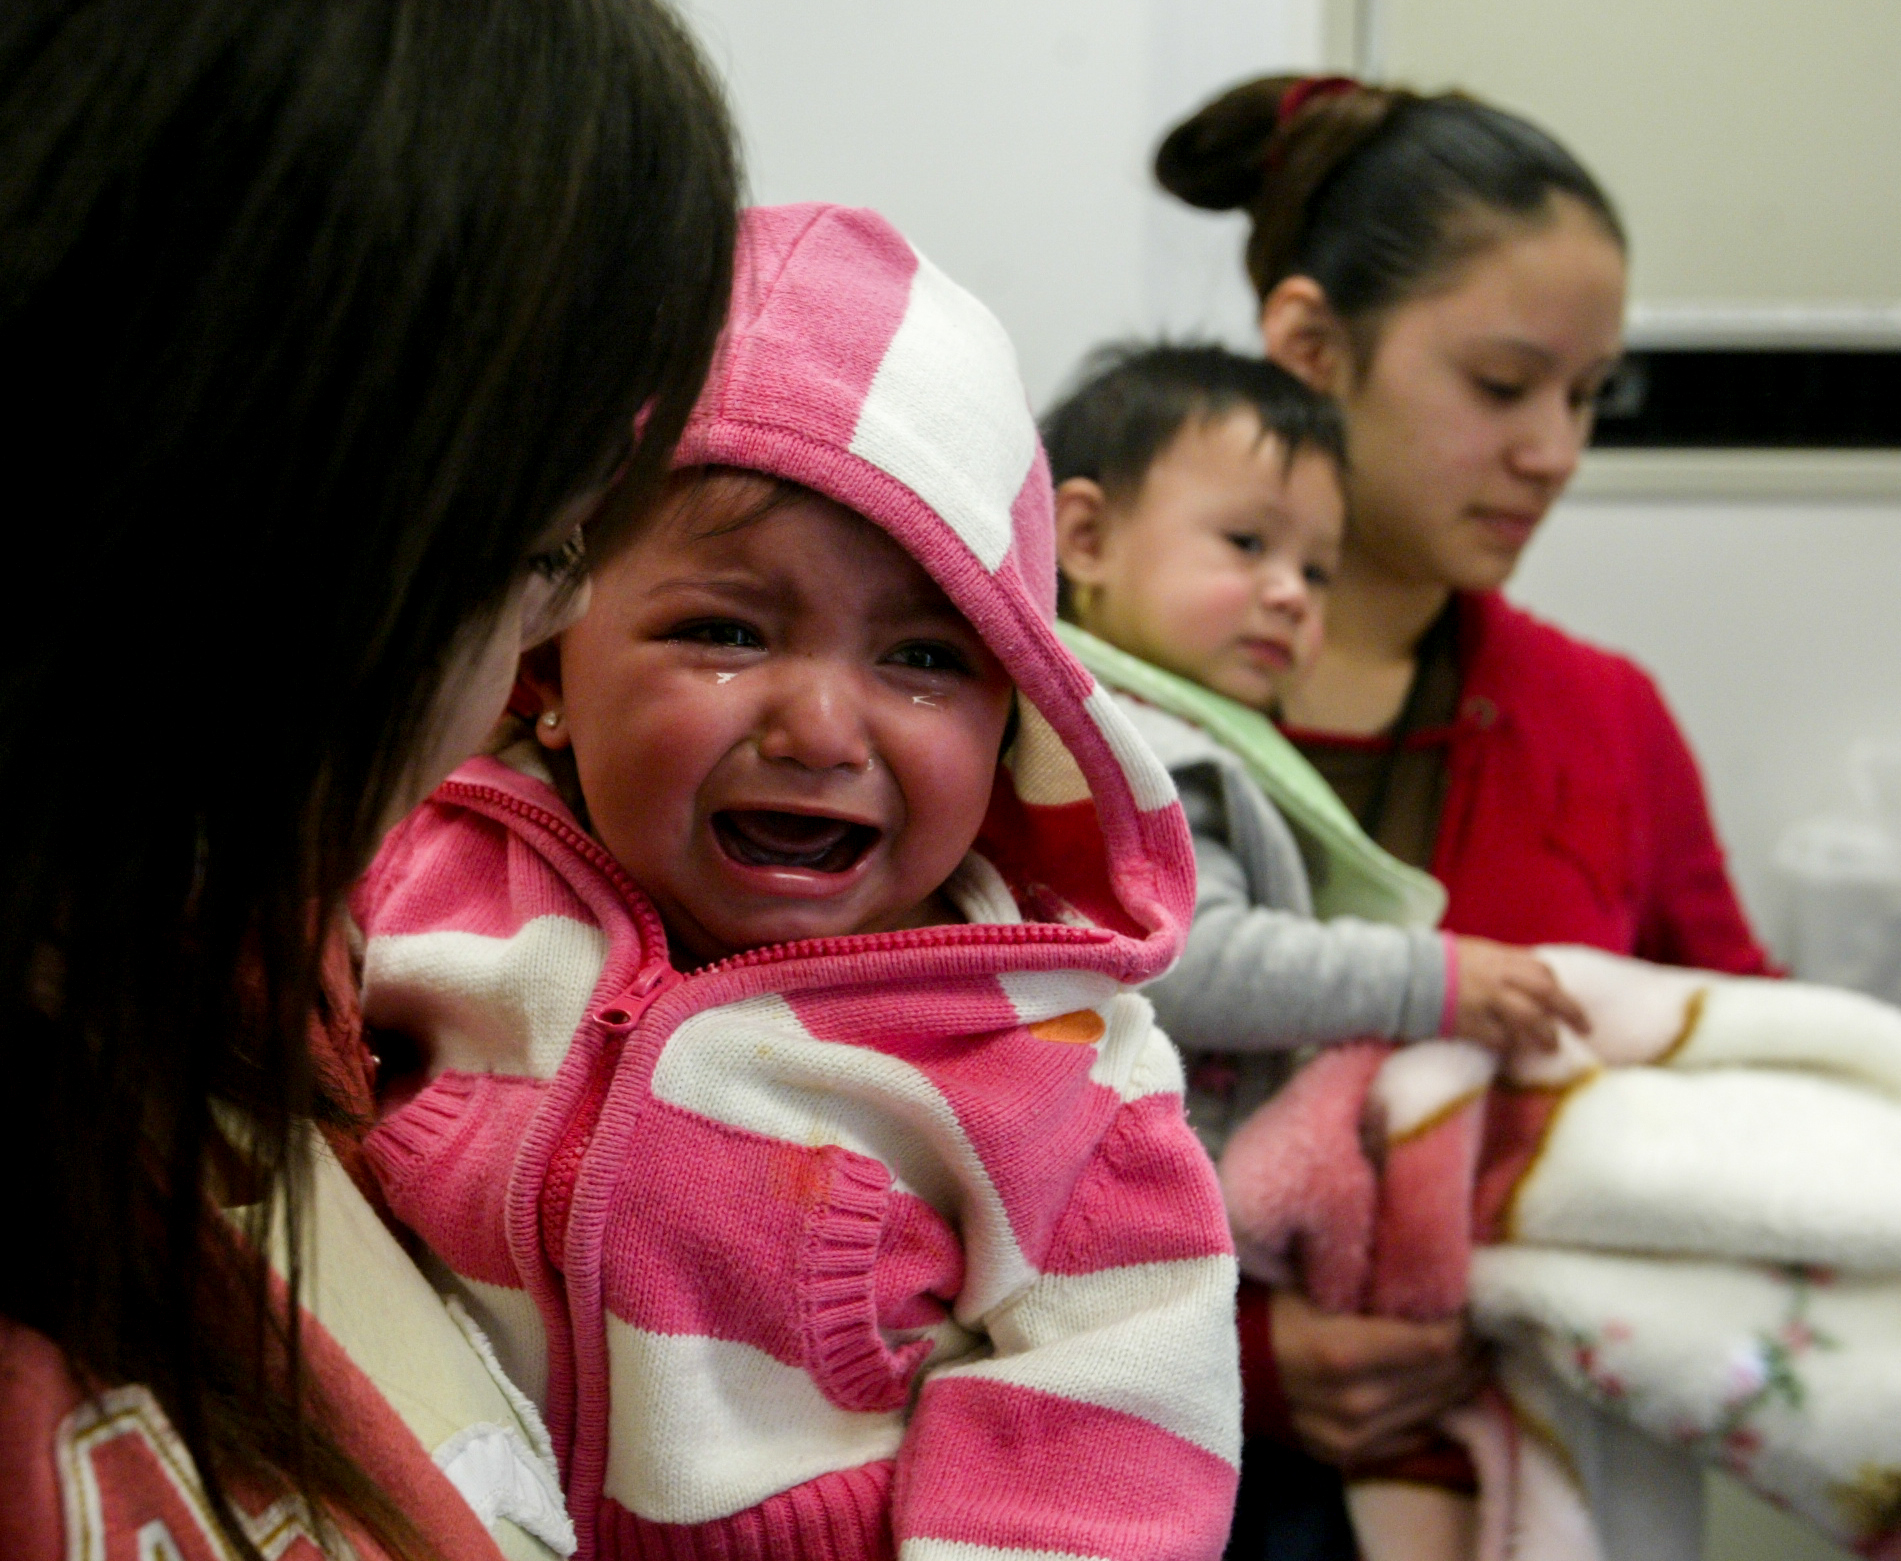  Irene Vera, left, 16, comforts her daughter, Aryana Vera, 10 months, after she received a checkup and a shot Thursday, Feb. 21, 2008, at the Ronald McDonald CareMobile in Odessa, Texas. At right is Xazmyn Martinez, 16, with her 10-month-old daughter